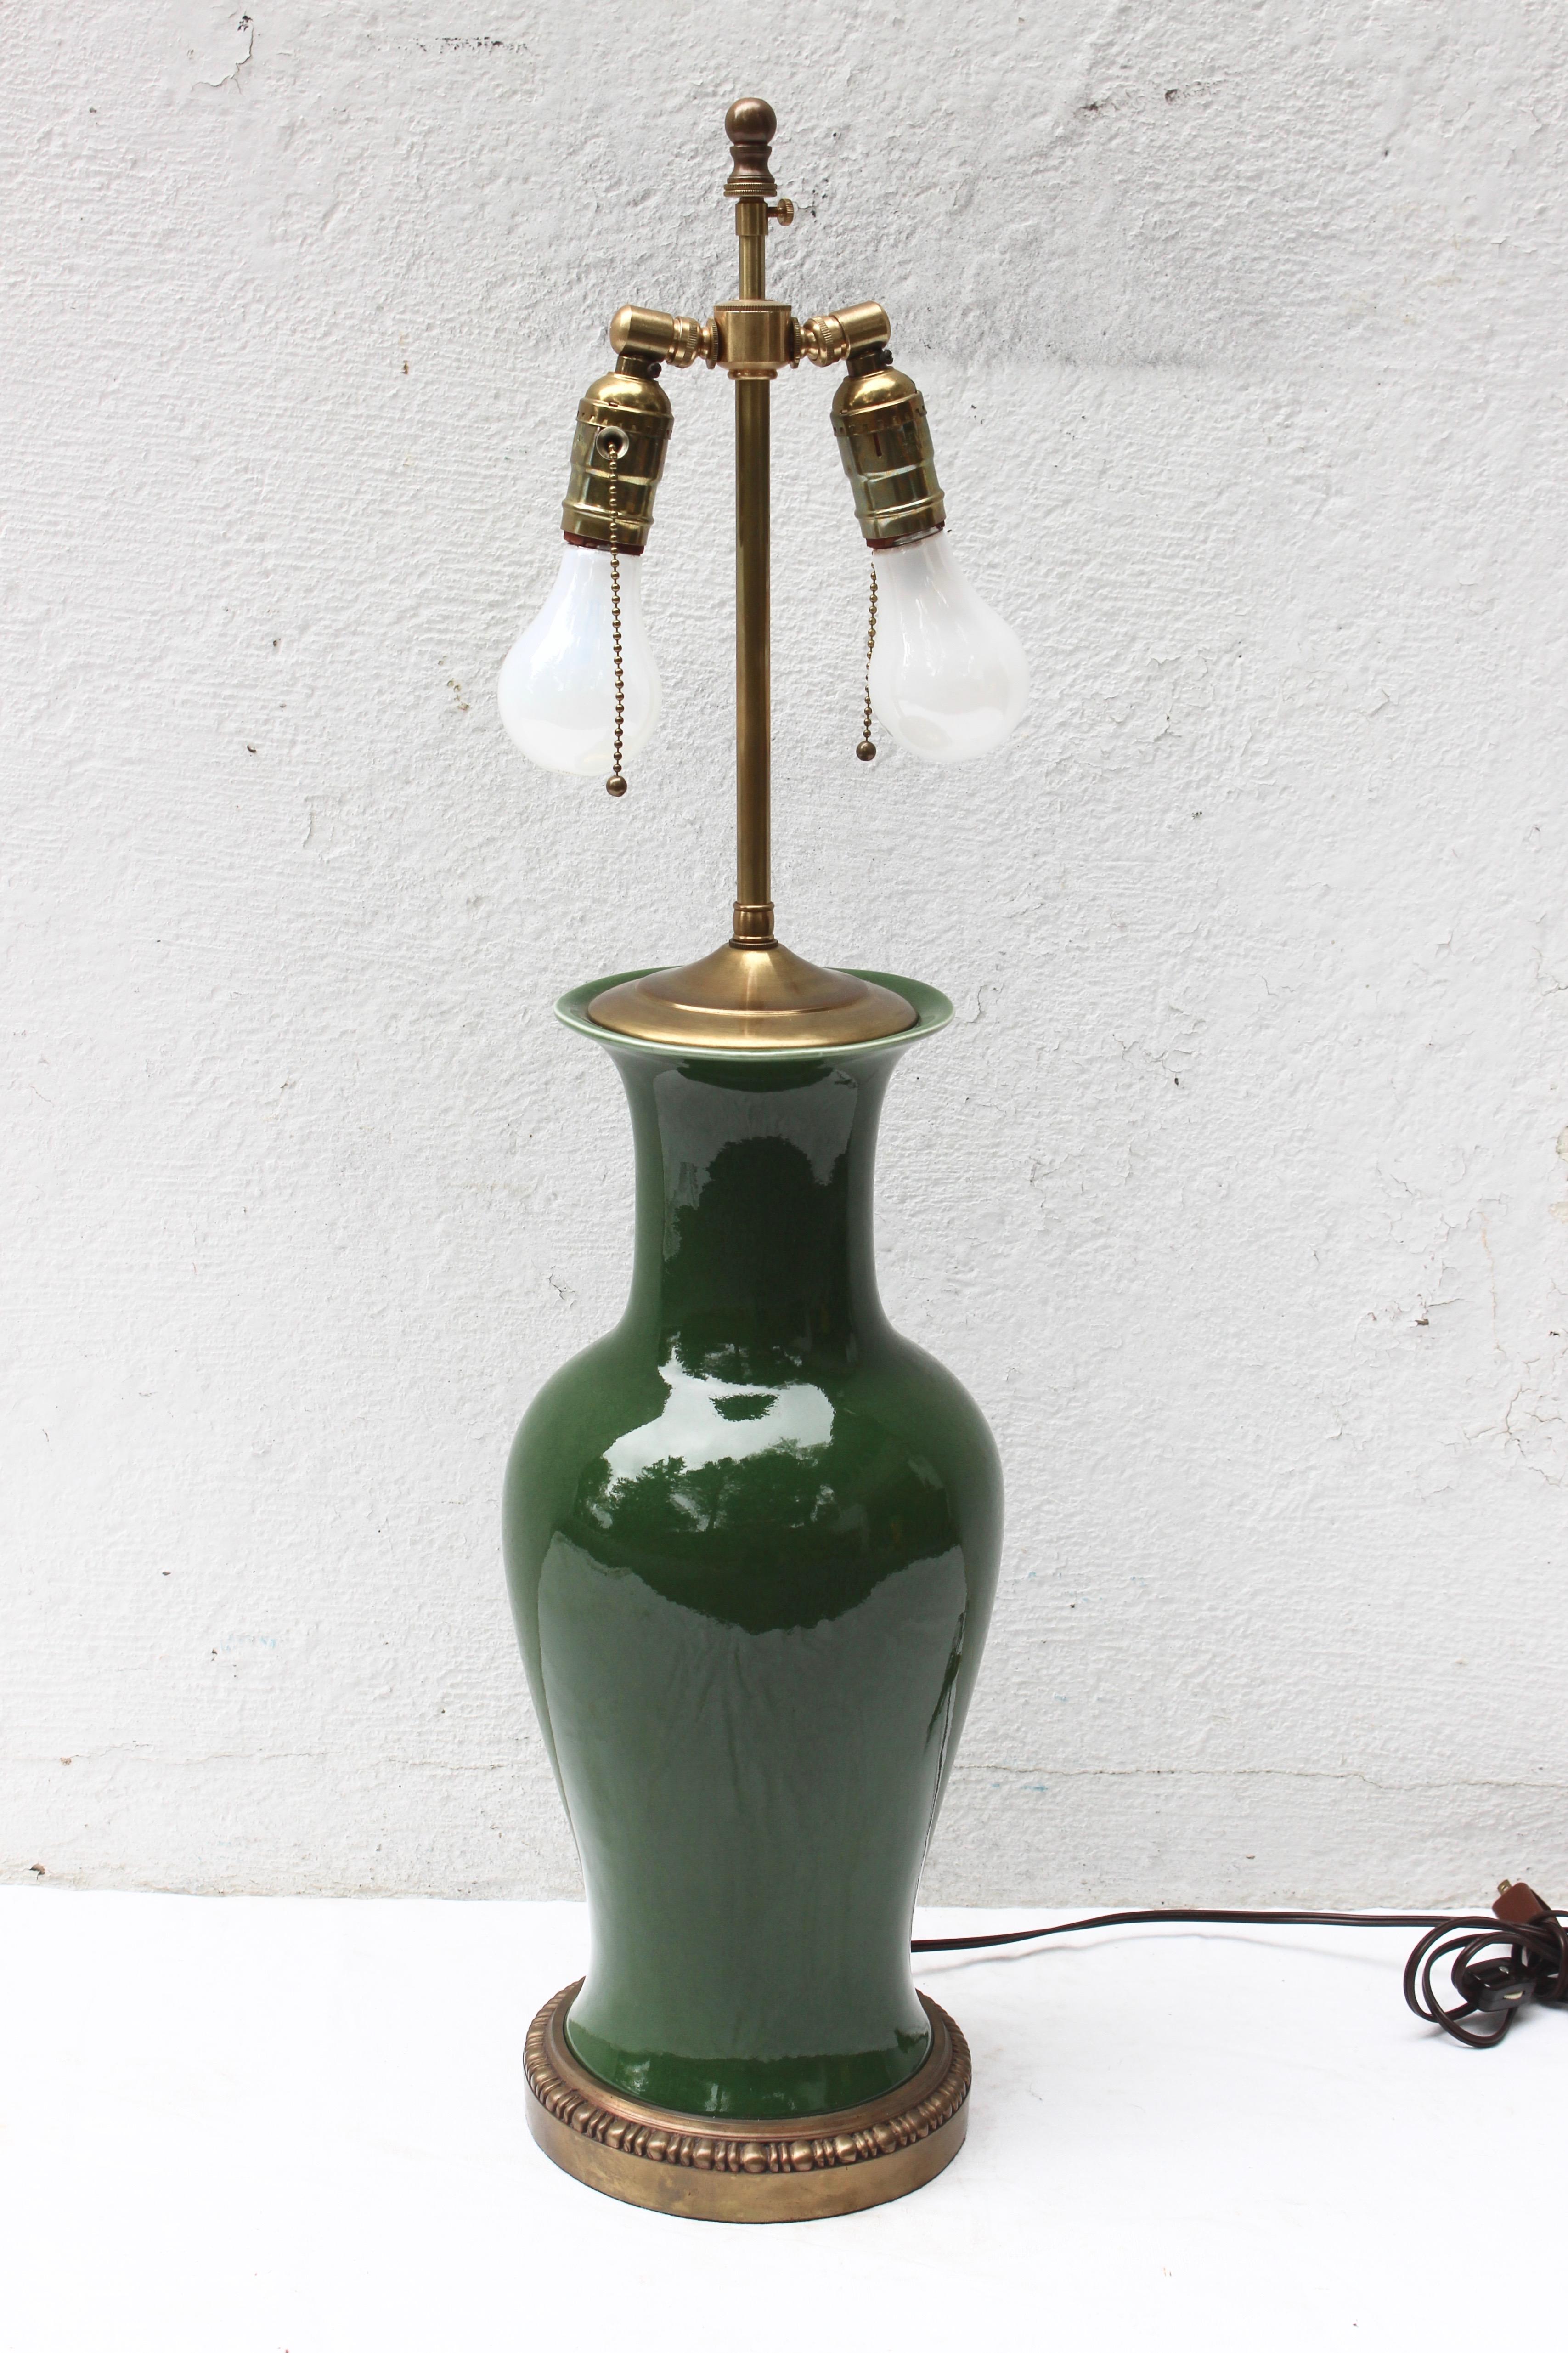 Large green ceramic table lamp with brass base

Lamp base: 29.5 